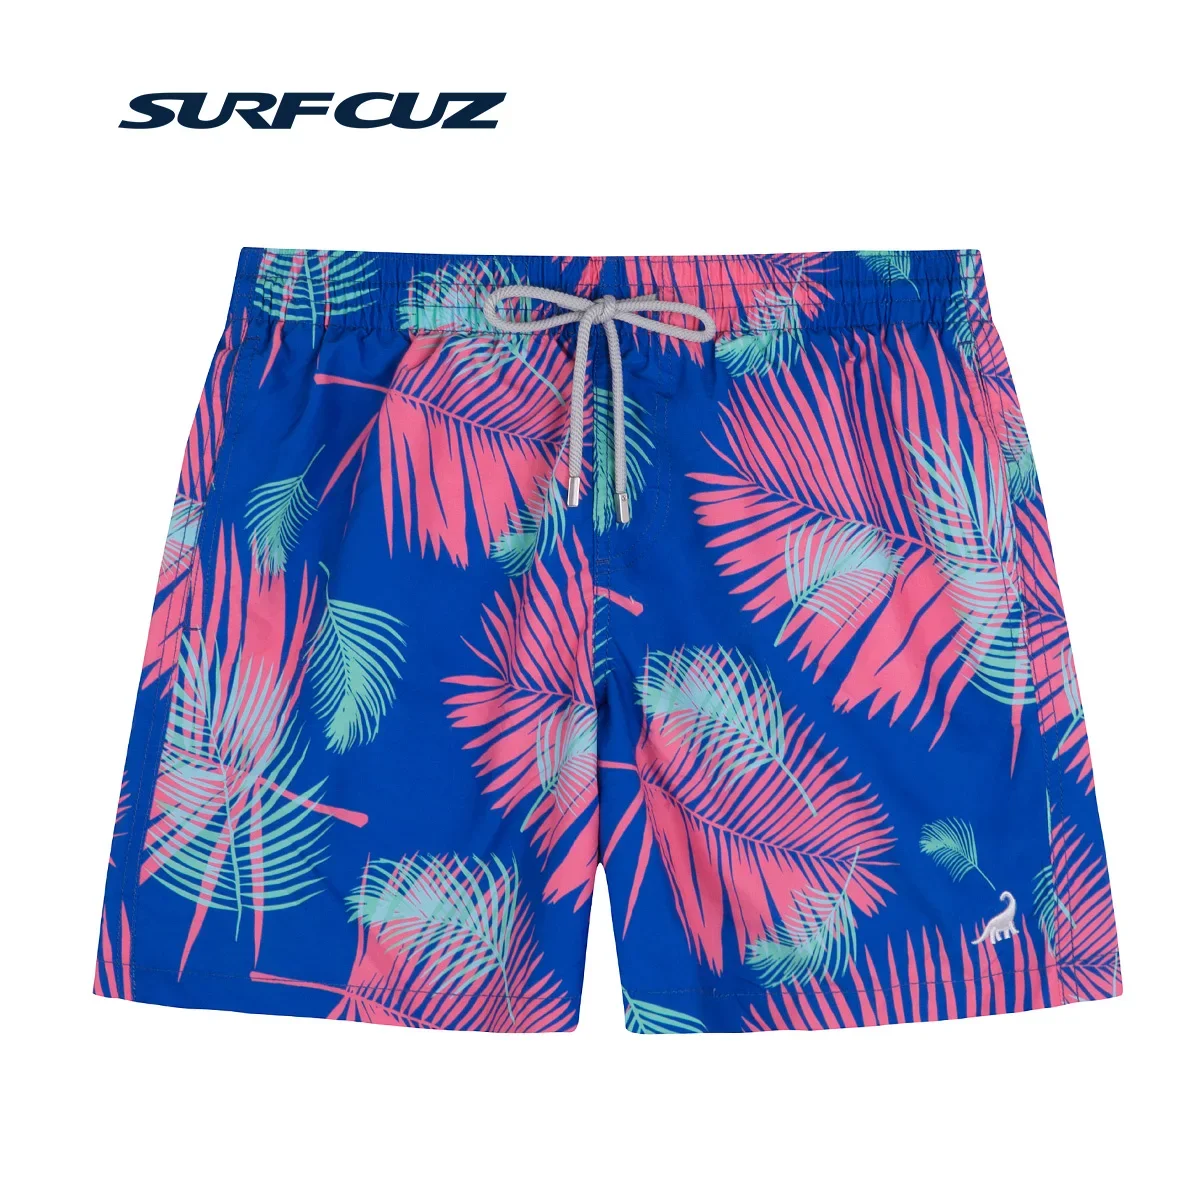 Surfcuz Men Quick-Dry Beach Shorts Seaside Holiday Shorts Men's Hot Springs Swimming Shorts Swimming Trunks Men's Have Lining